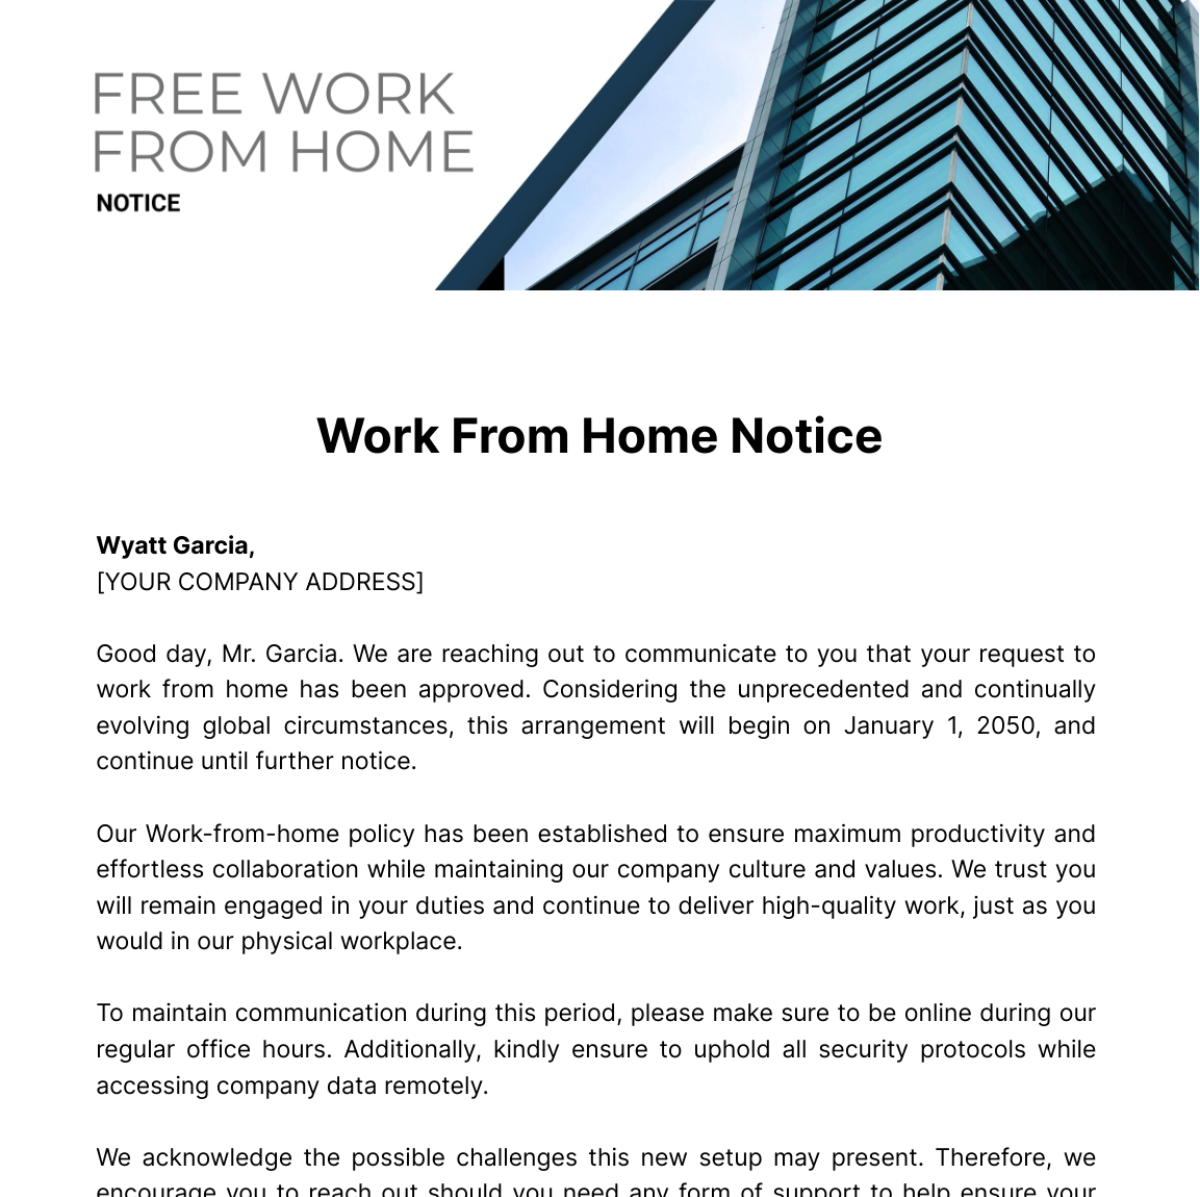 Free Work from Home Notice Template